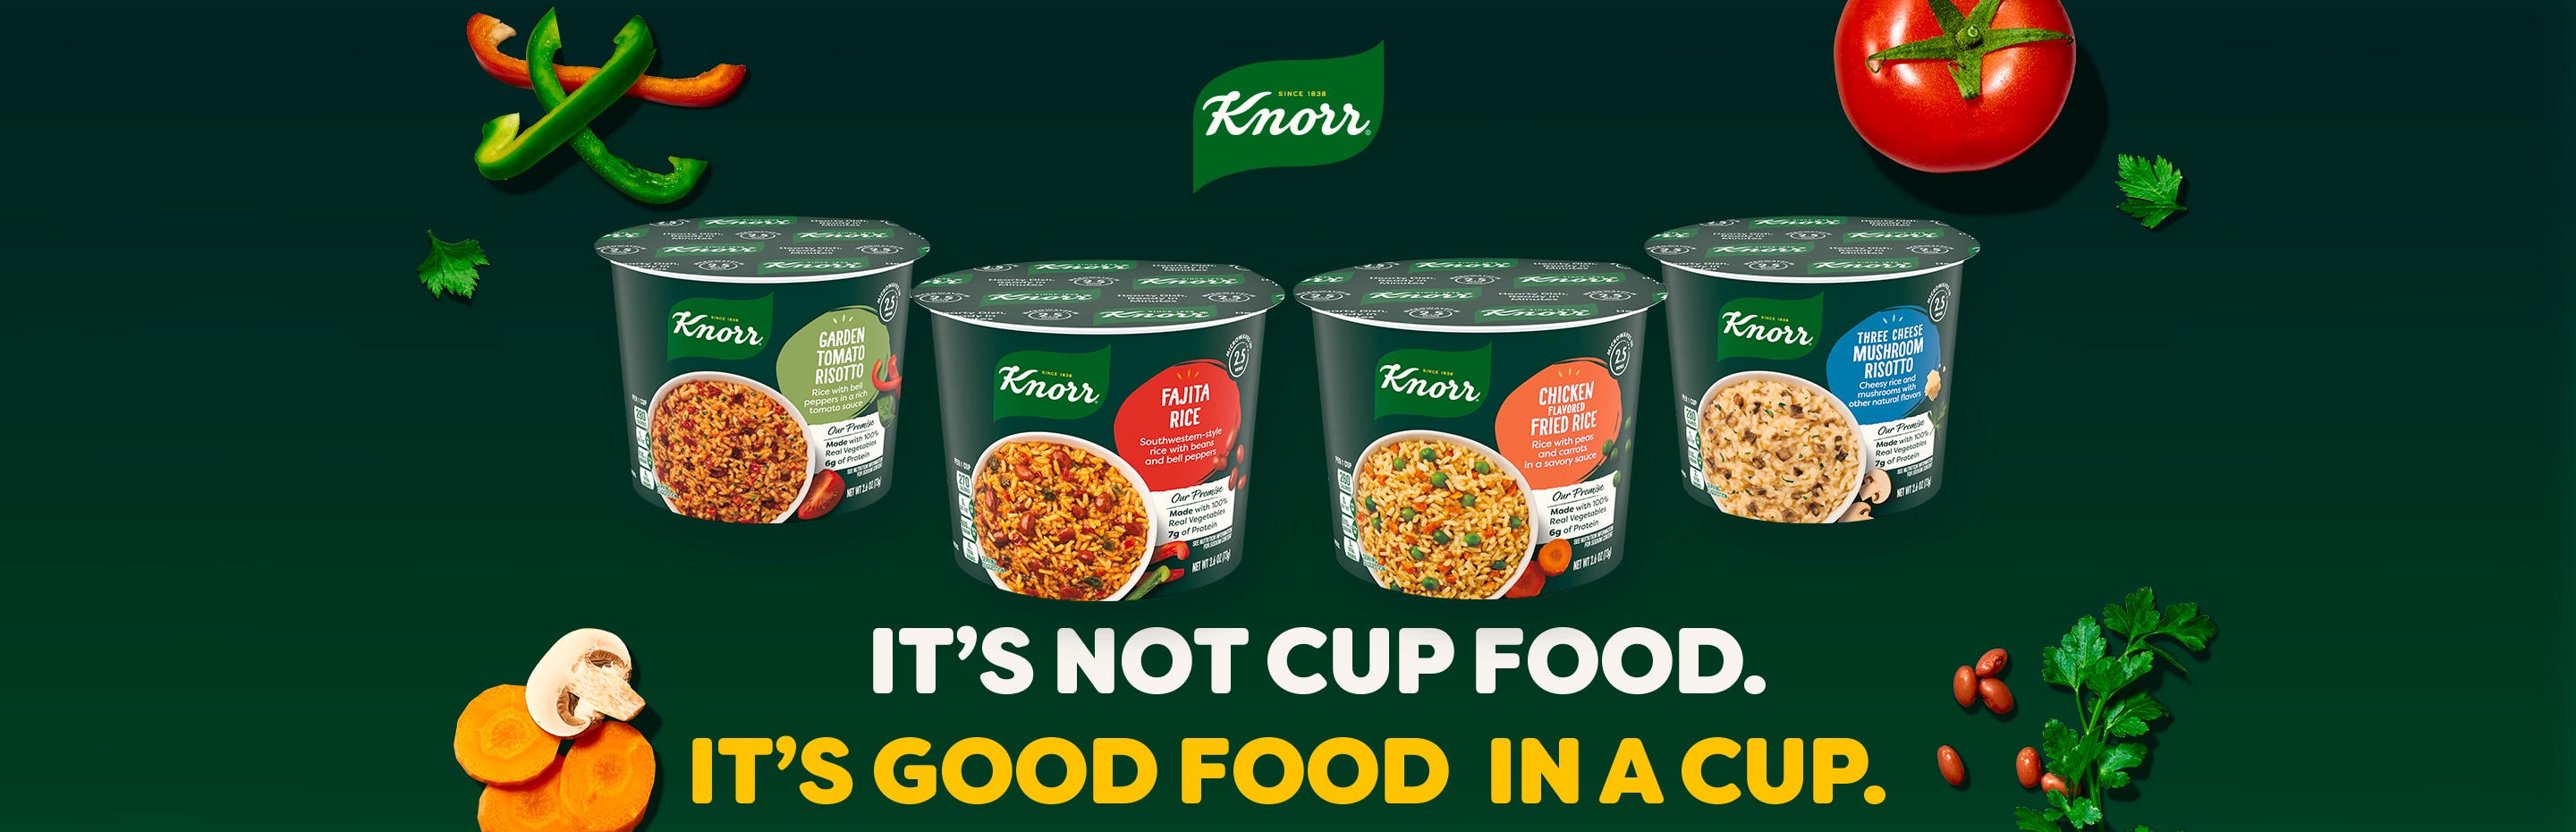 Knorr Rice Cups